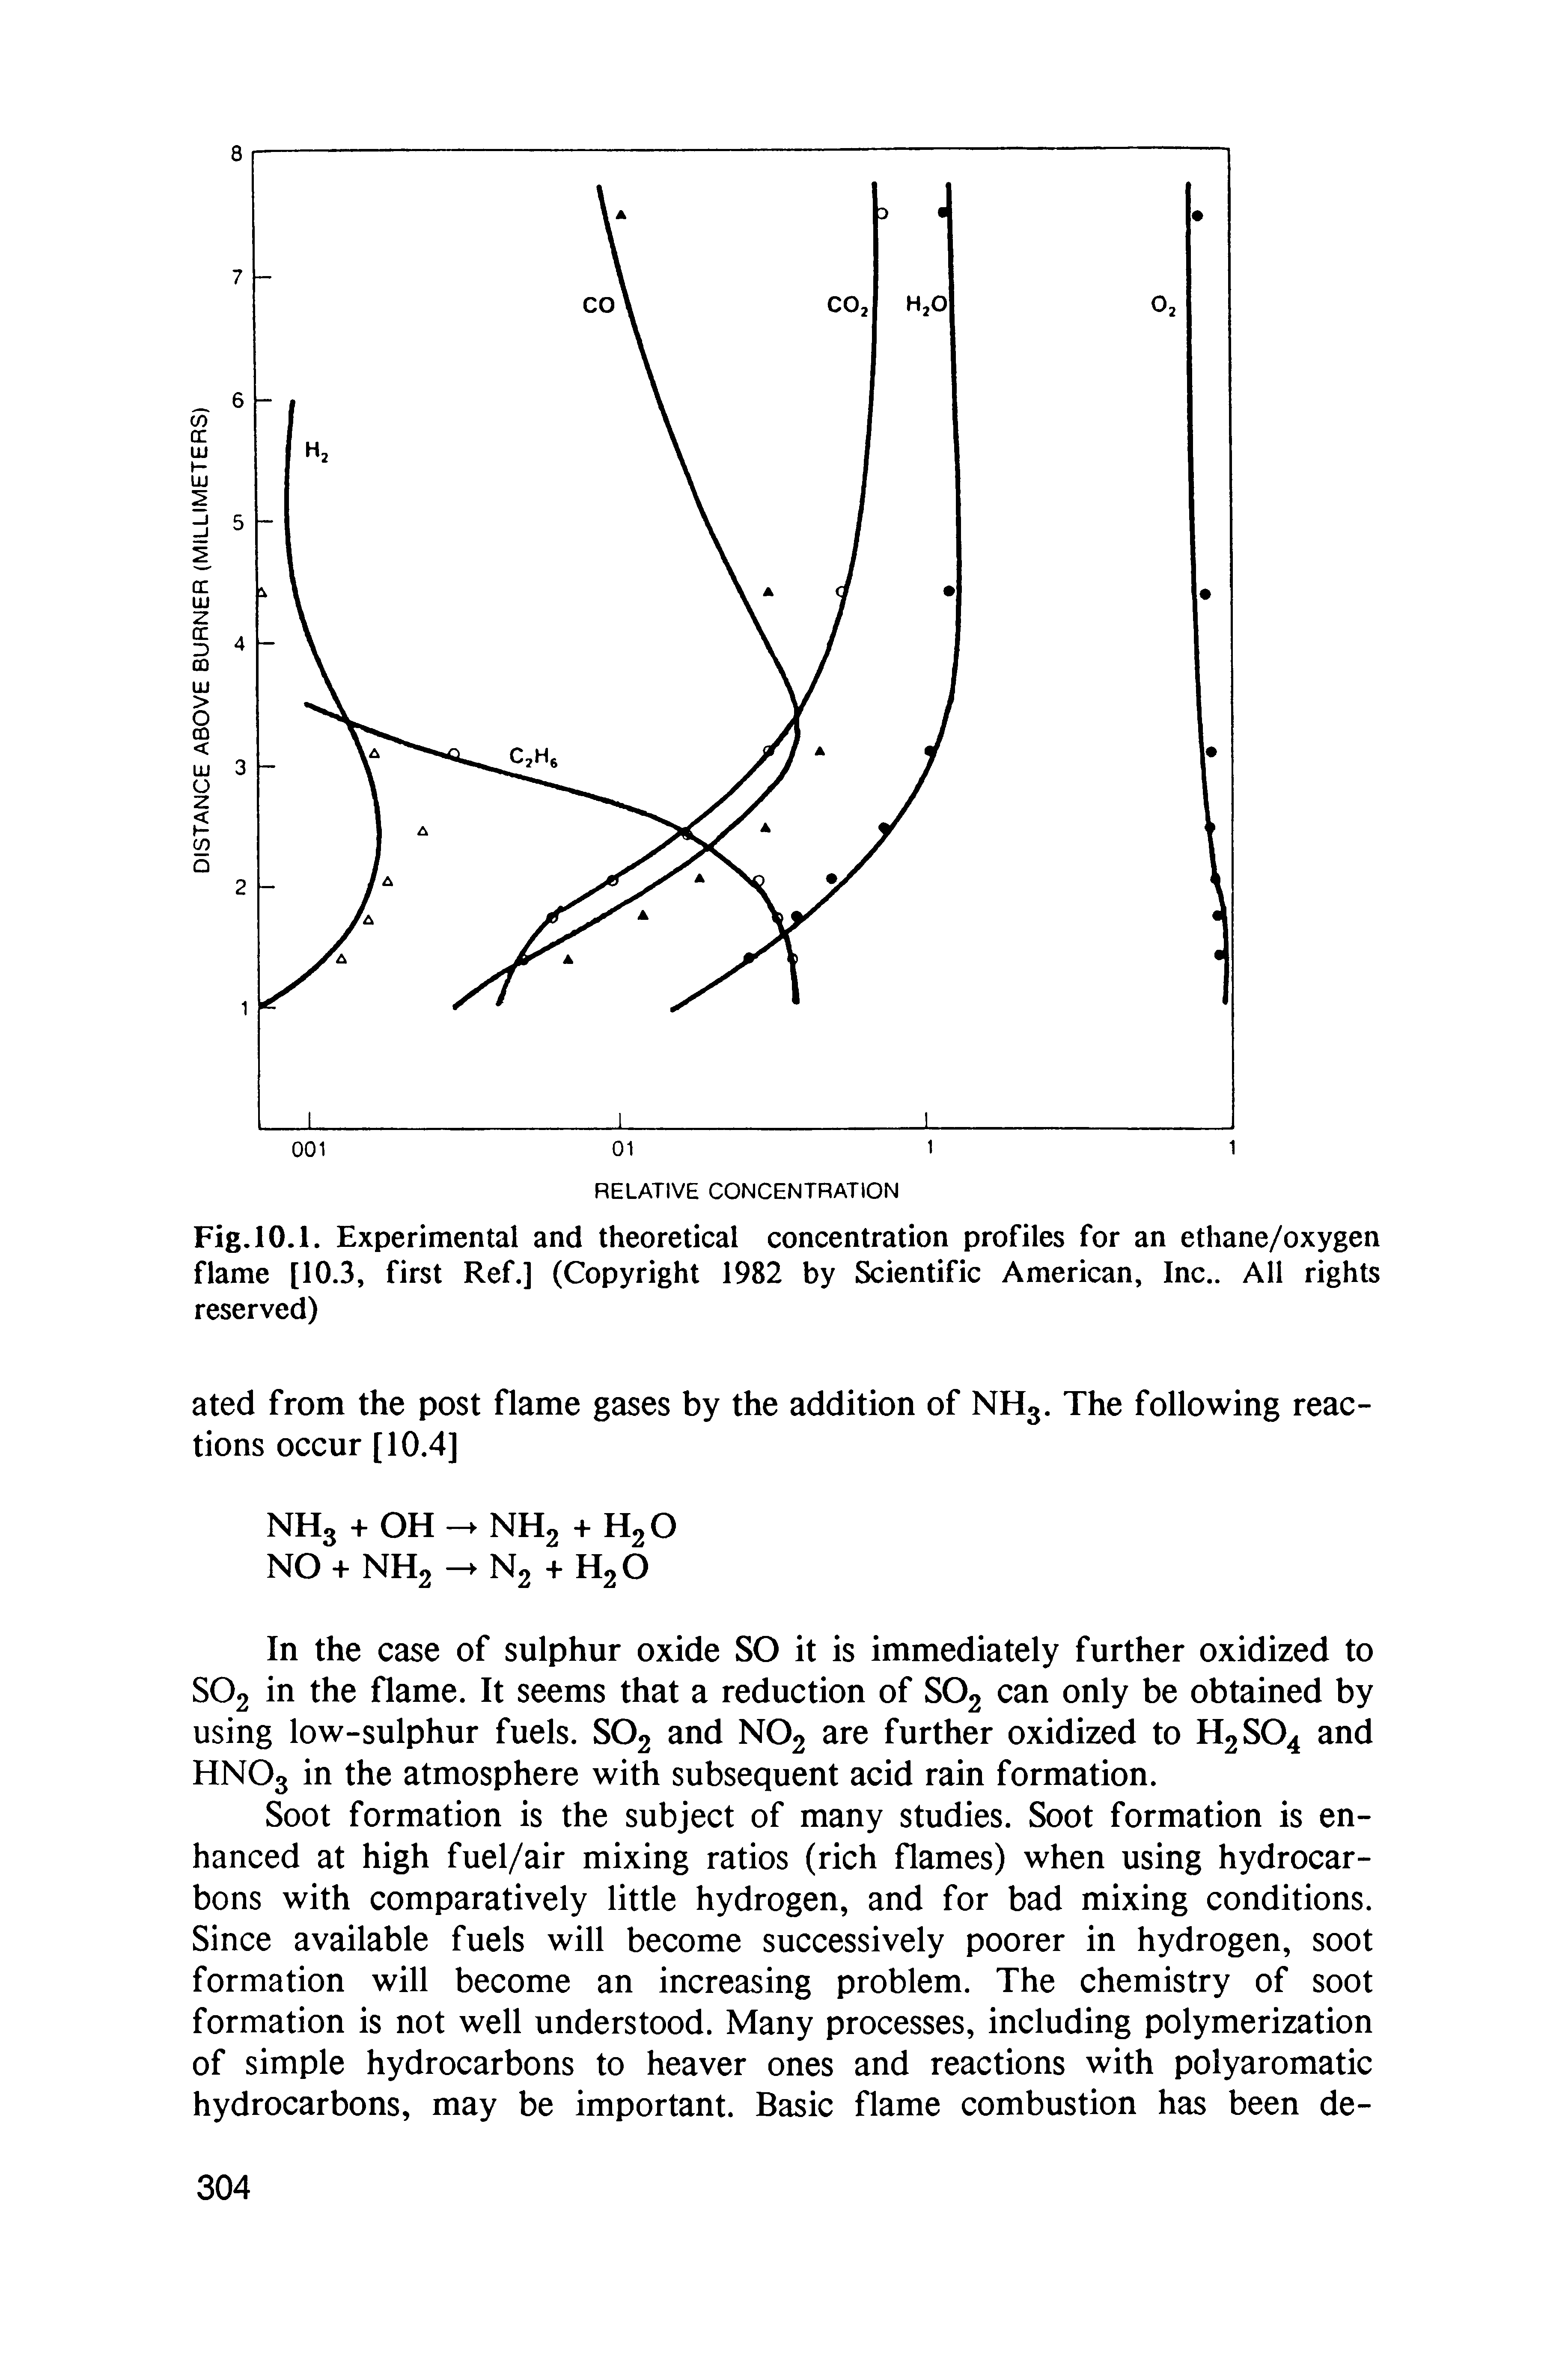 Fig. 10.1. Experimental and theoretical concentration profiles for an ethane/oxygen flame [10.3, first Ref.] (Copyright 1982 by Scientific American, Inc.. All rights reserved)...